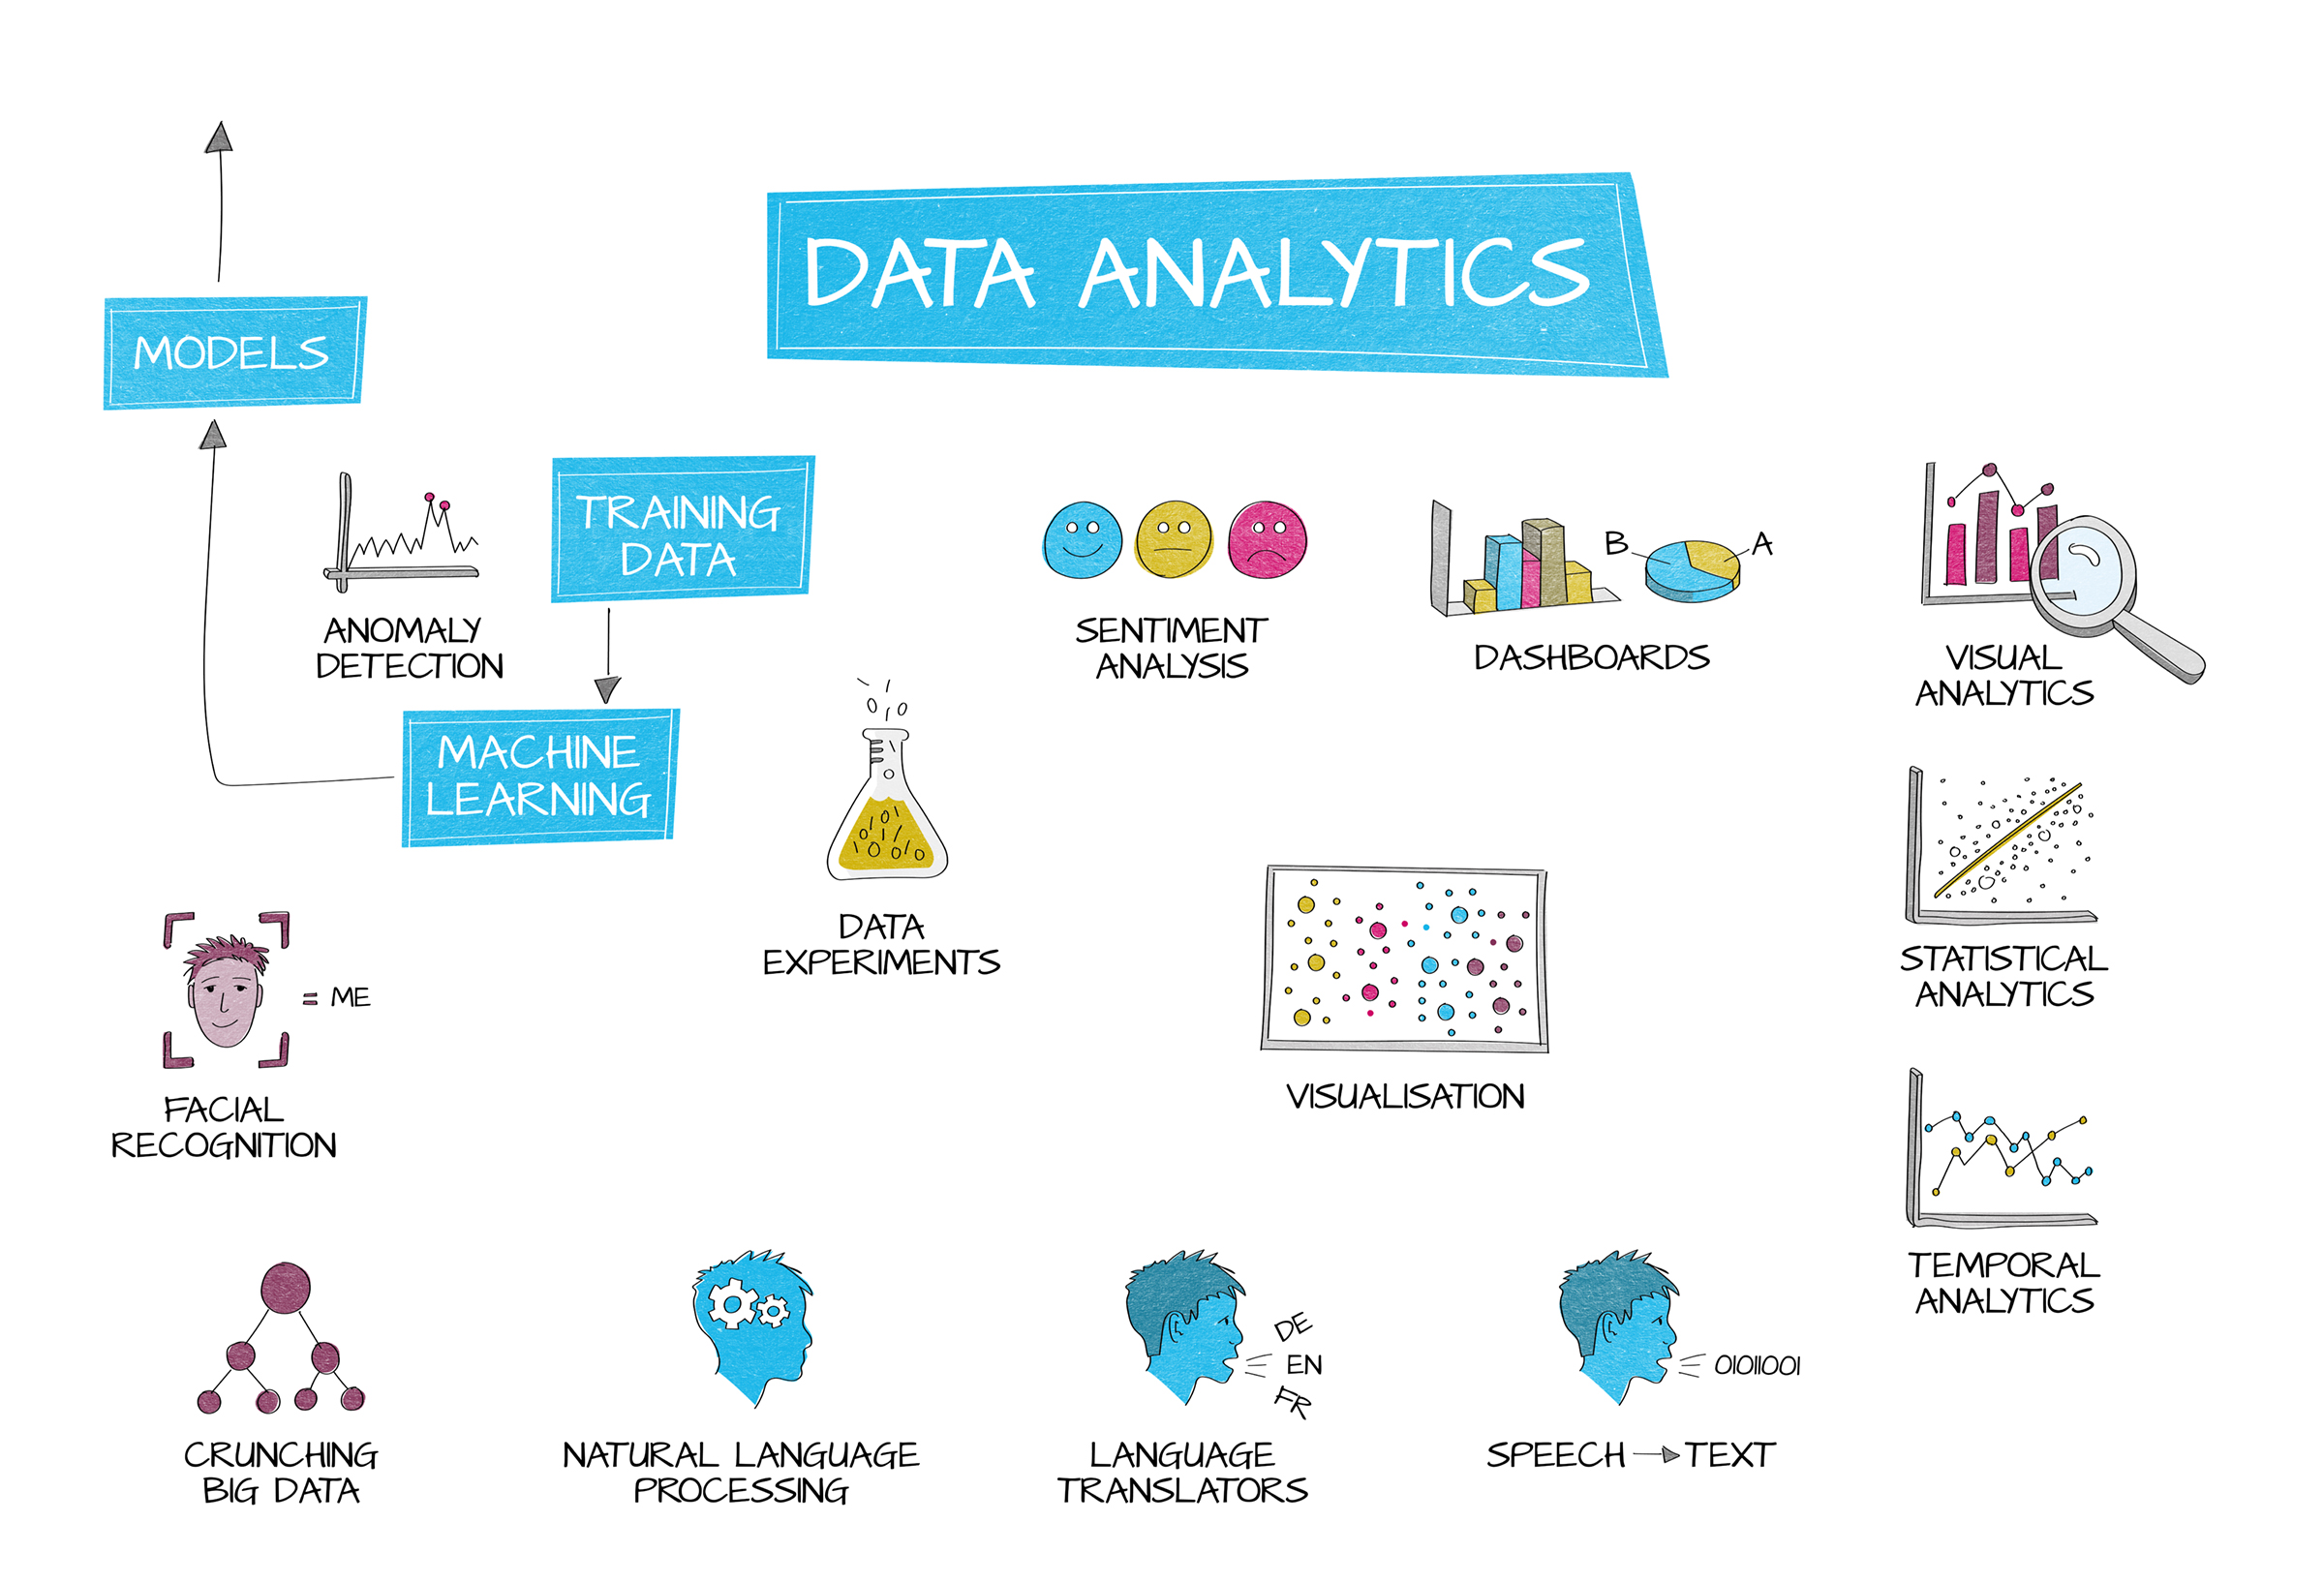 5 benefits of data analytics for your business